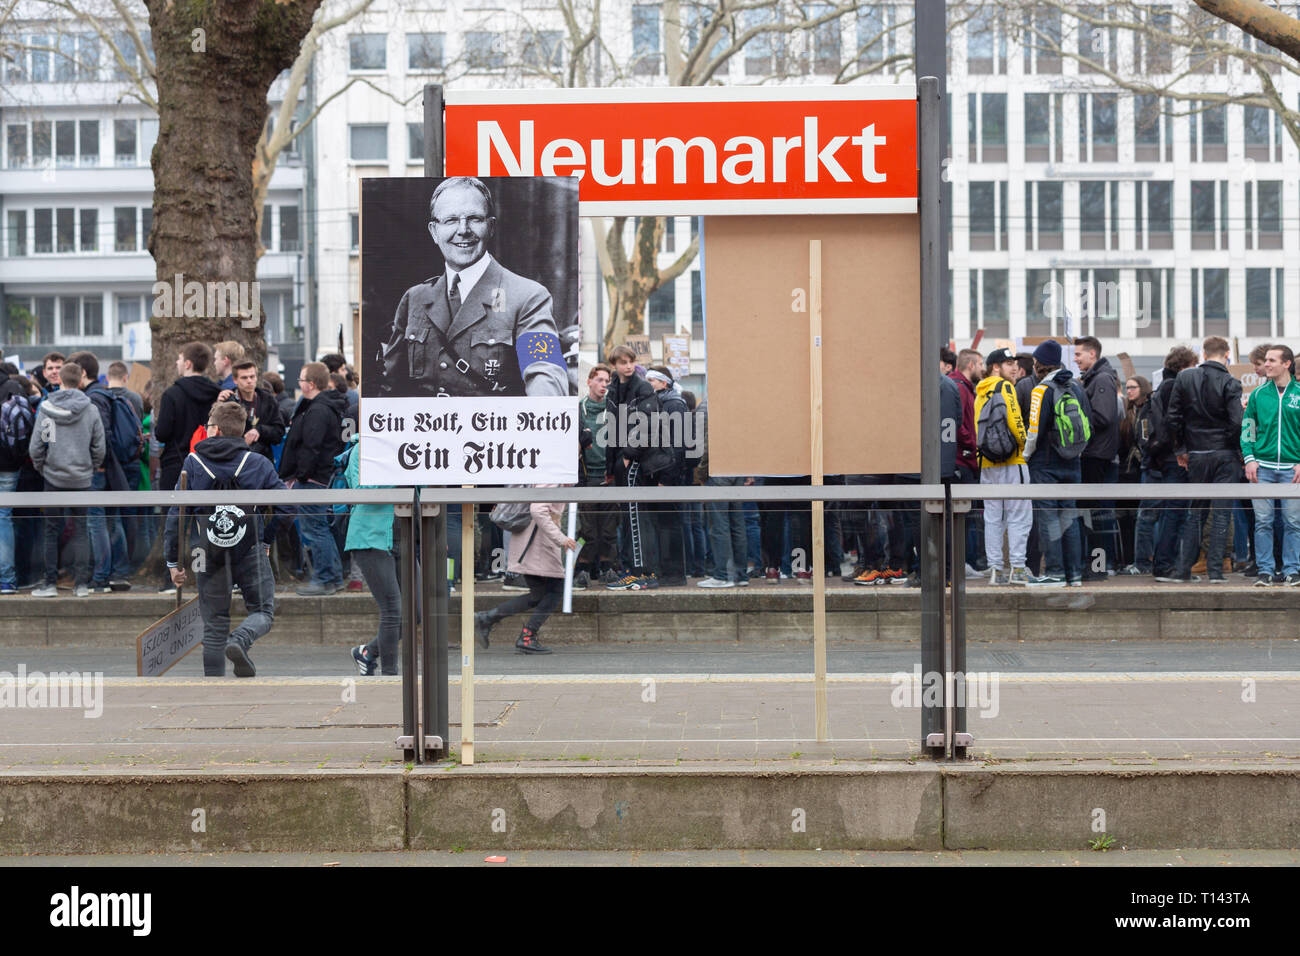 Cologne, Germany, March 23 2019: Demonstration against upload filter, on a poster standing apart is the politician Axel Voss shown.             Credit: Juergen Schwarz/Alamy Live News Stock Photo